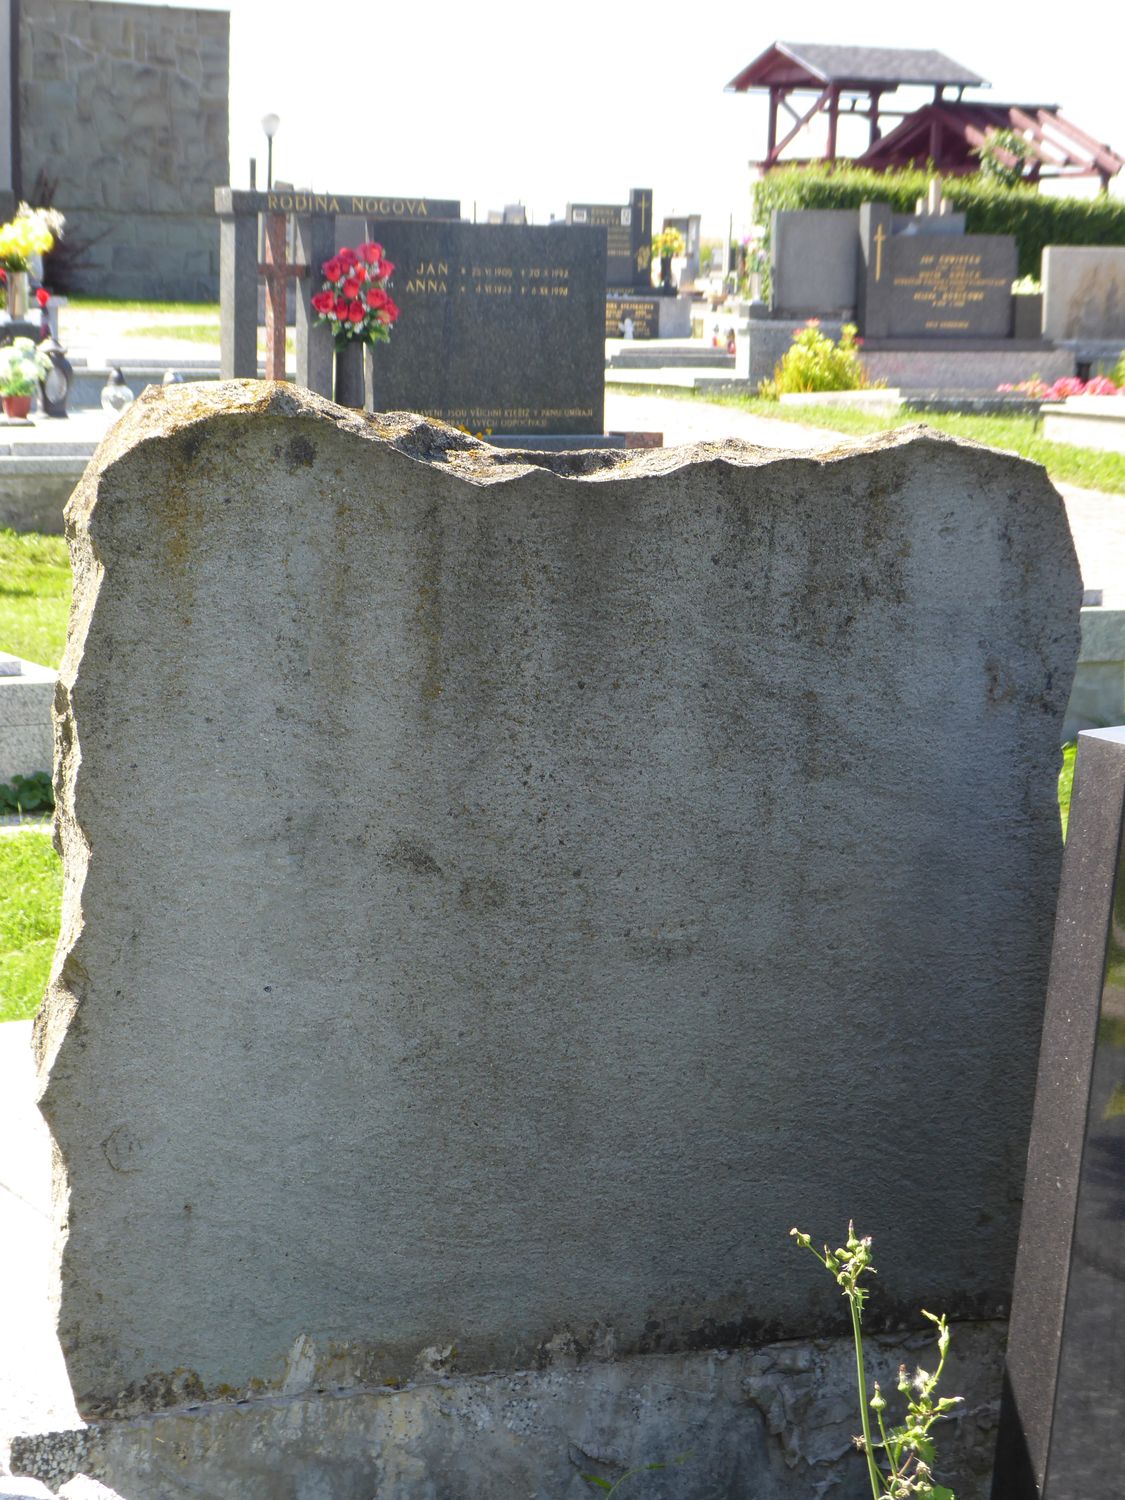 Fragment of the tomb of the Przeczk family from the cemetery of the Czech part of Těšín Silesia, as of 2022.